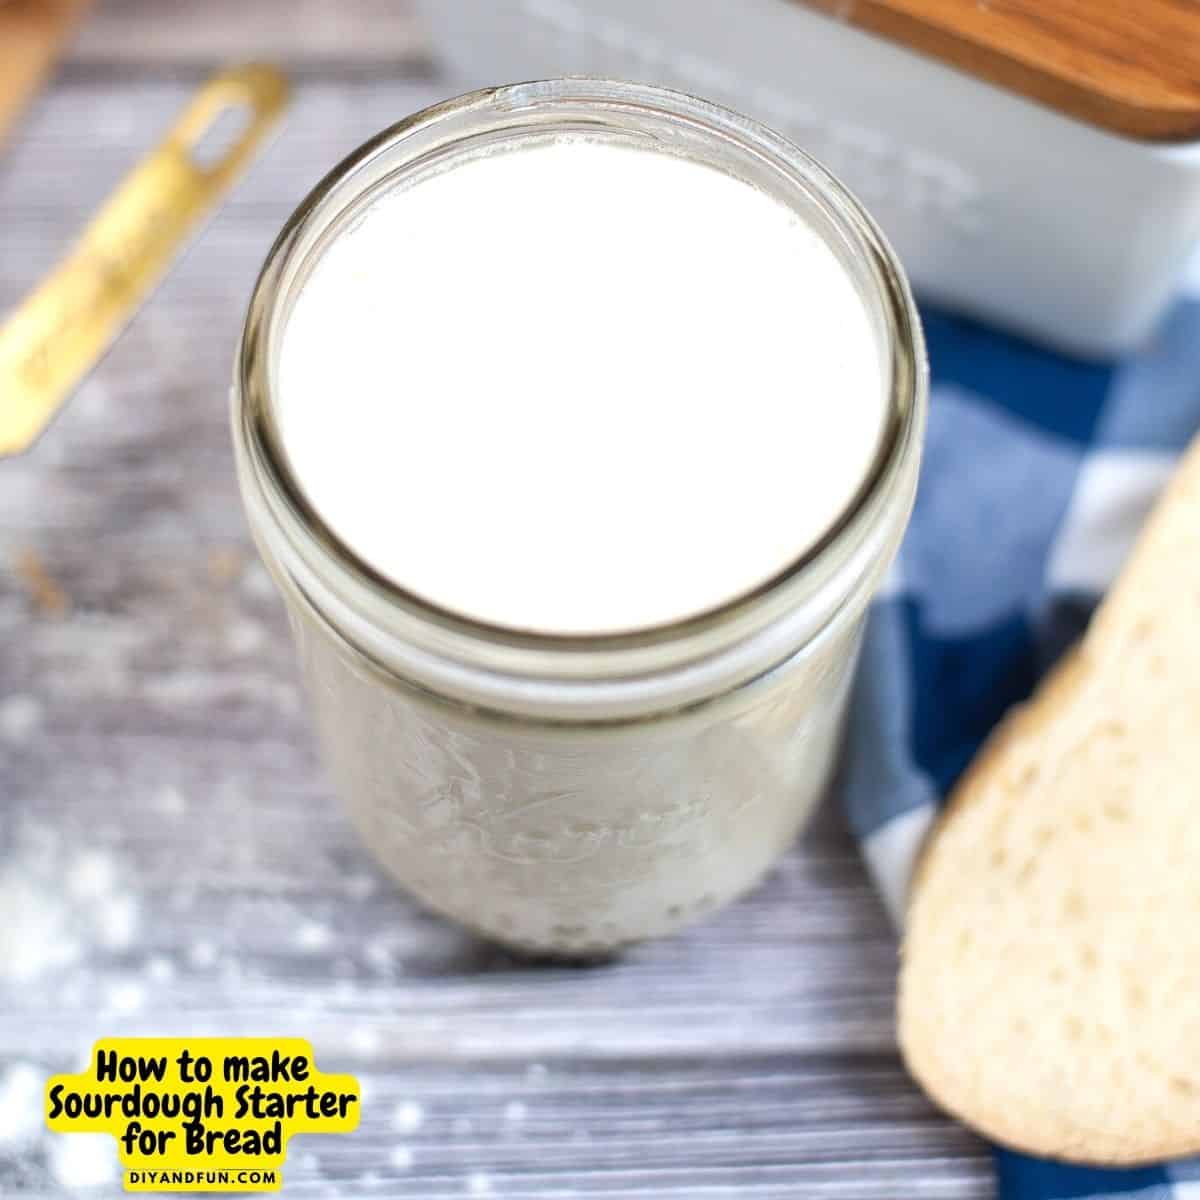 How to make Sourdough Starter for Bread, a  simple recipe for using yeast and bacteria from the environment to make naturally leavened bread.